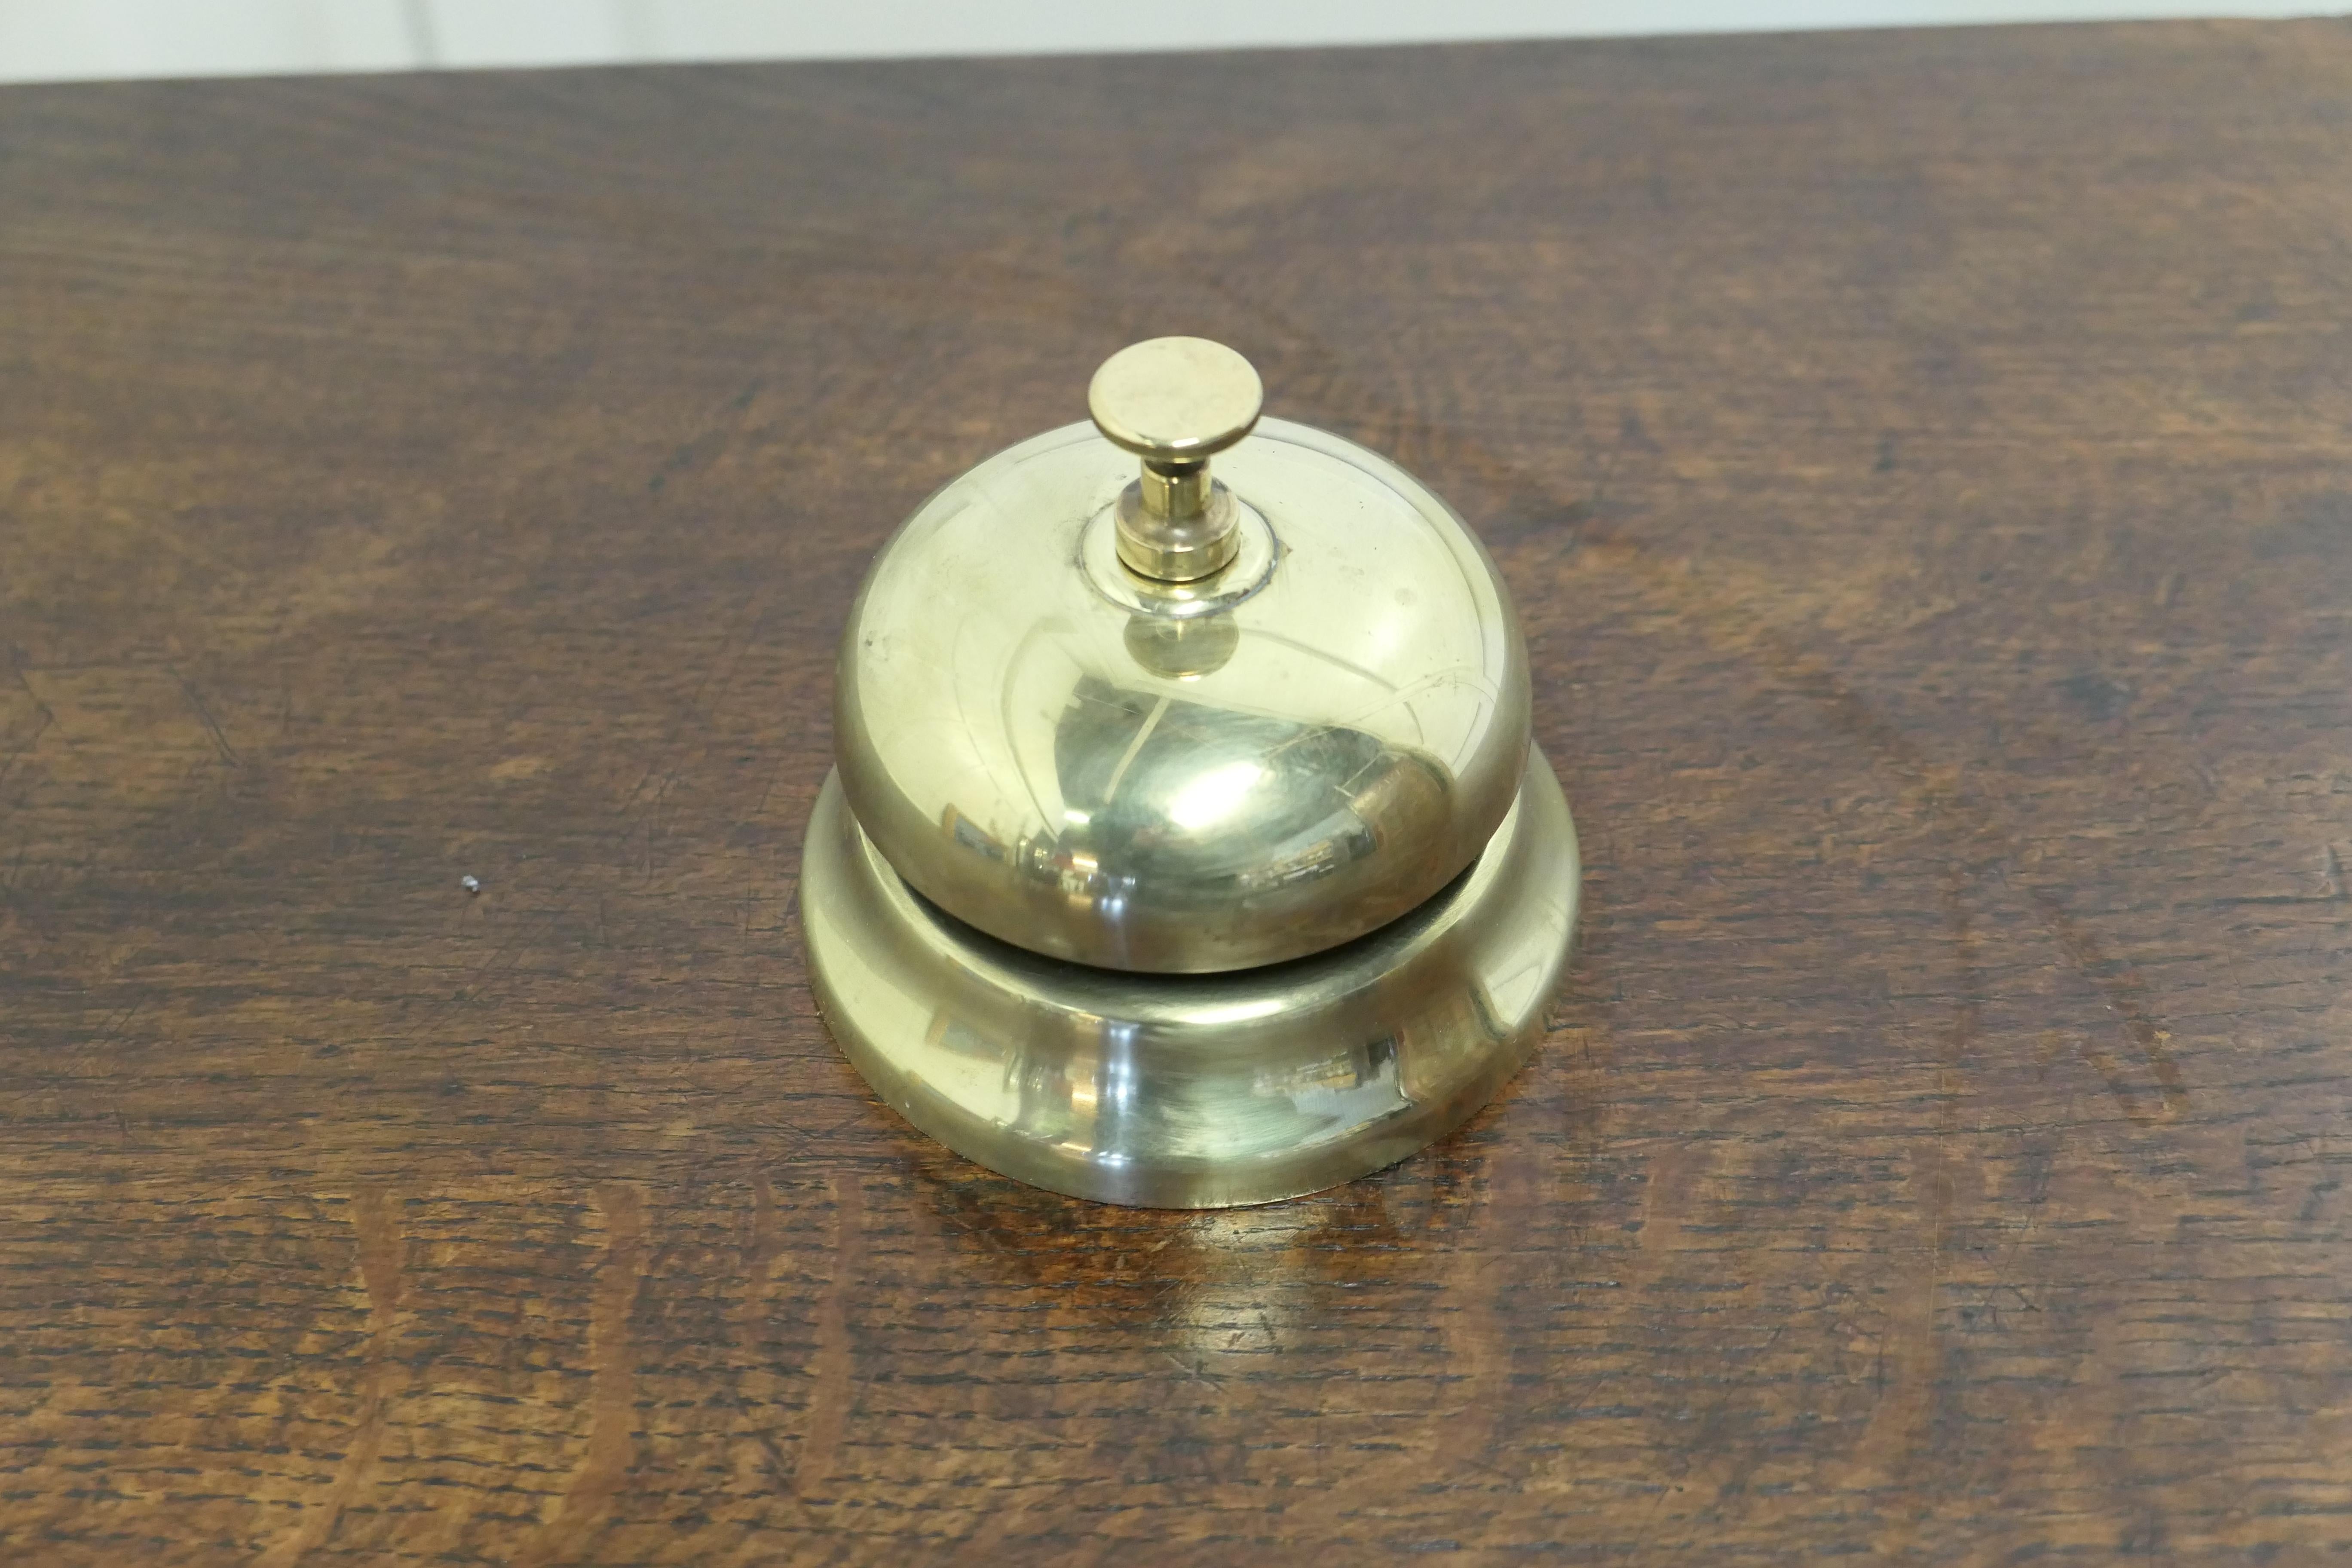 Brass Courtesy counter top bell, reception desk bell

Made in solid brass, in good condition and ready to use with a demanding ding, the bell is 4” in diameter and 4” high 
TCC46.